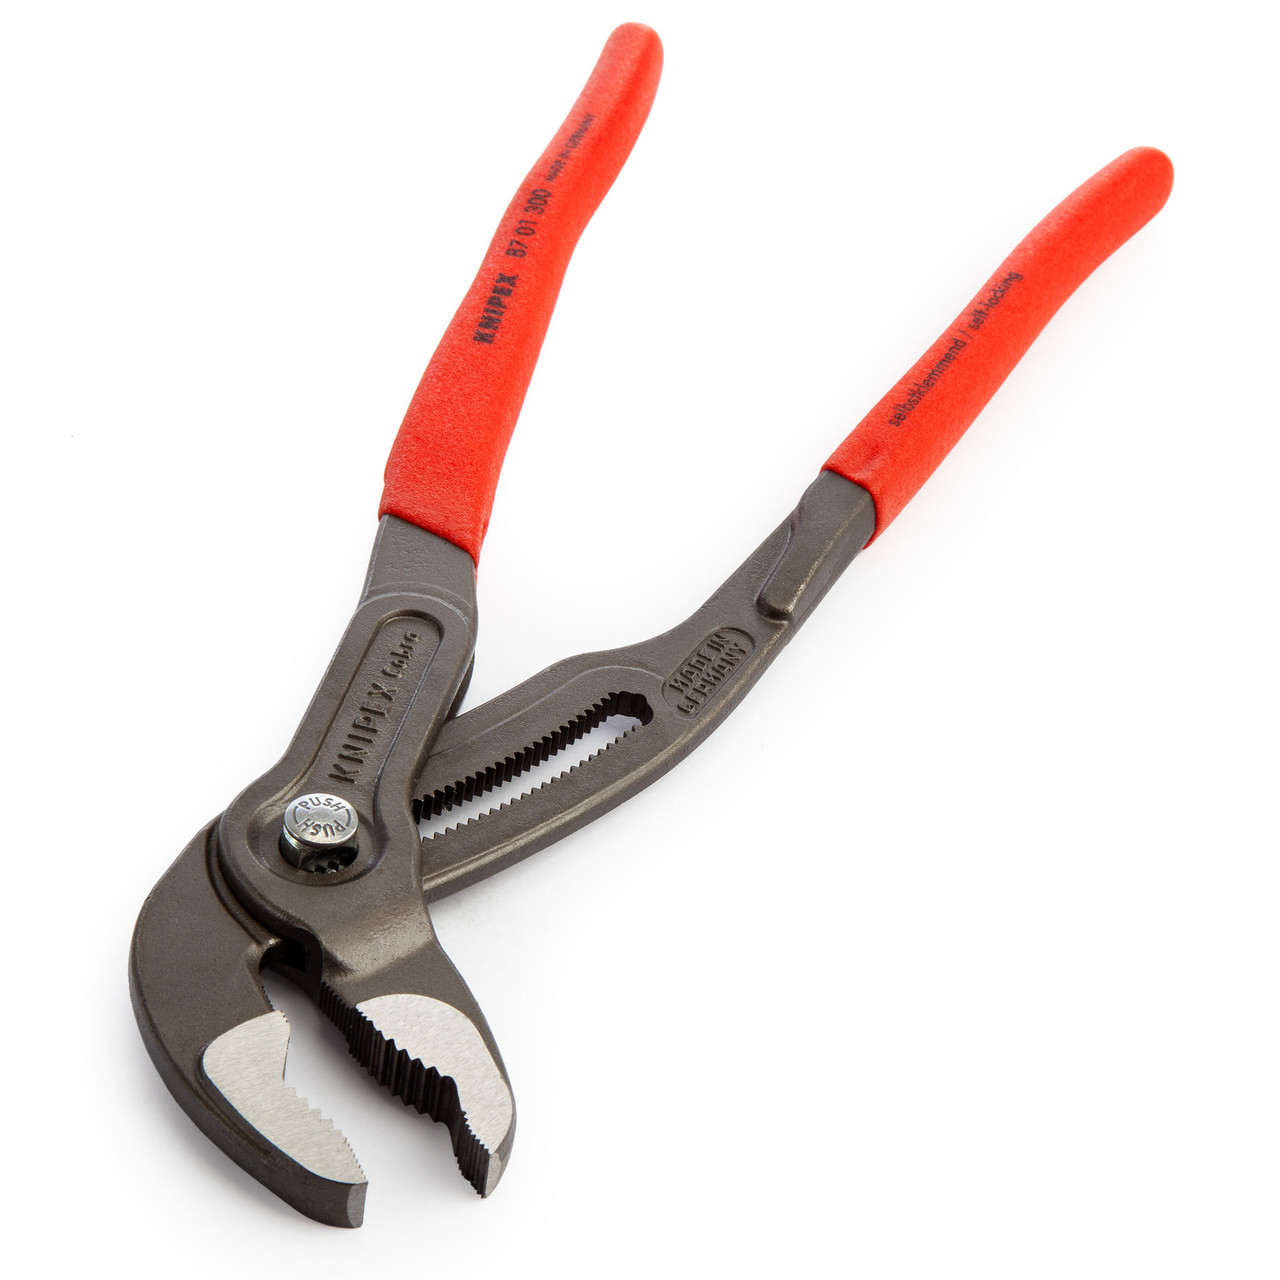 Photos - Pliers / Wire Cutters KNIPEX 8701300SB Cobra Pipe Wrench / Water Pump Pliers 300mm 